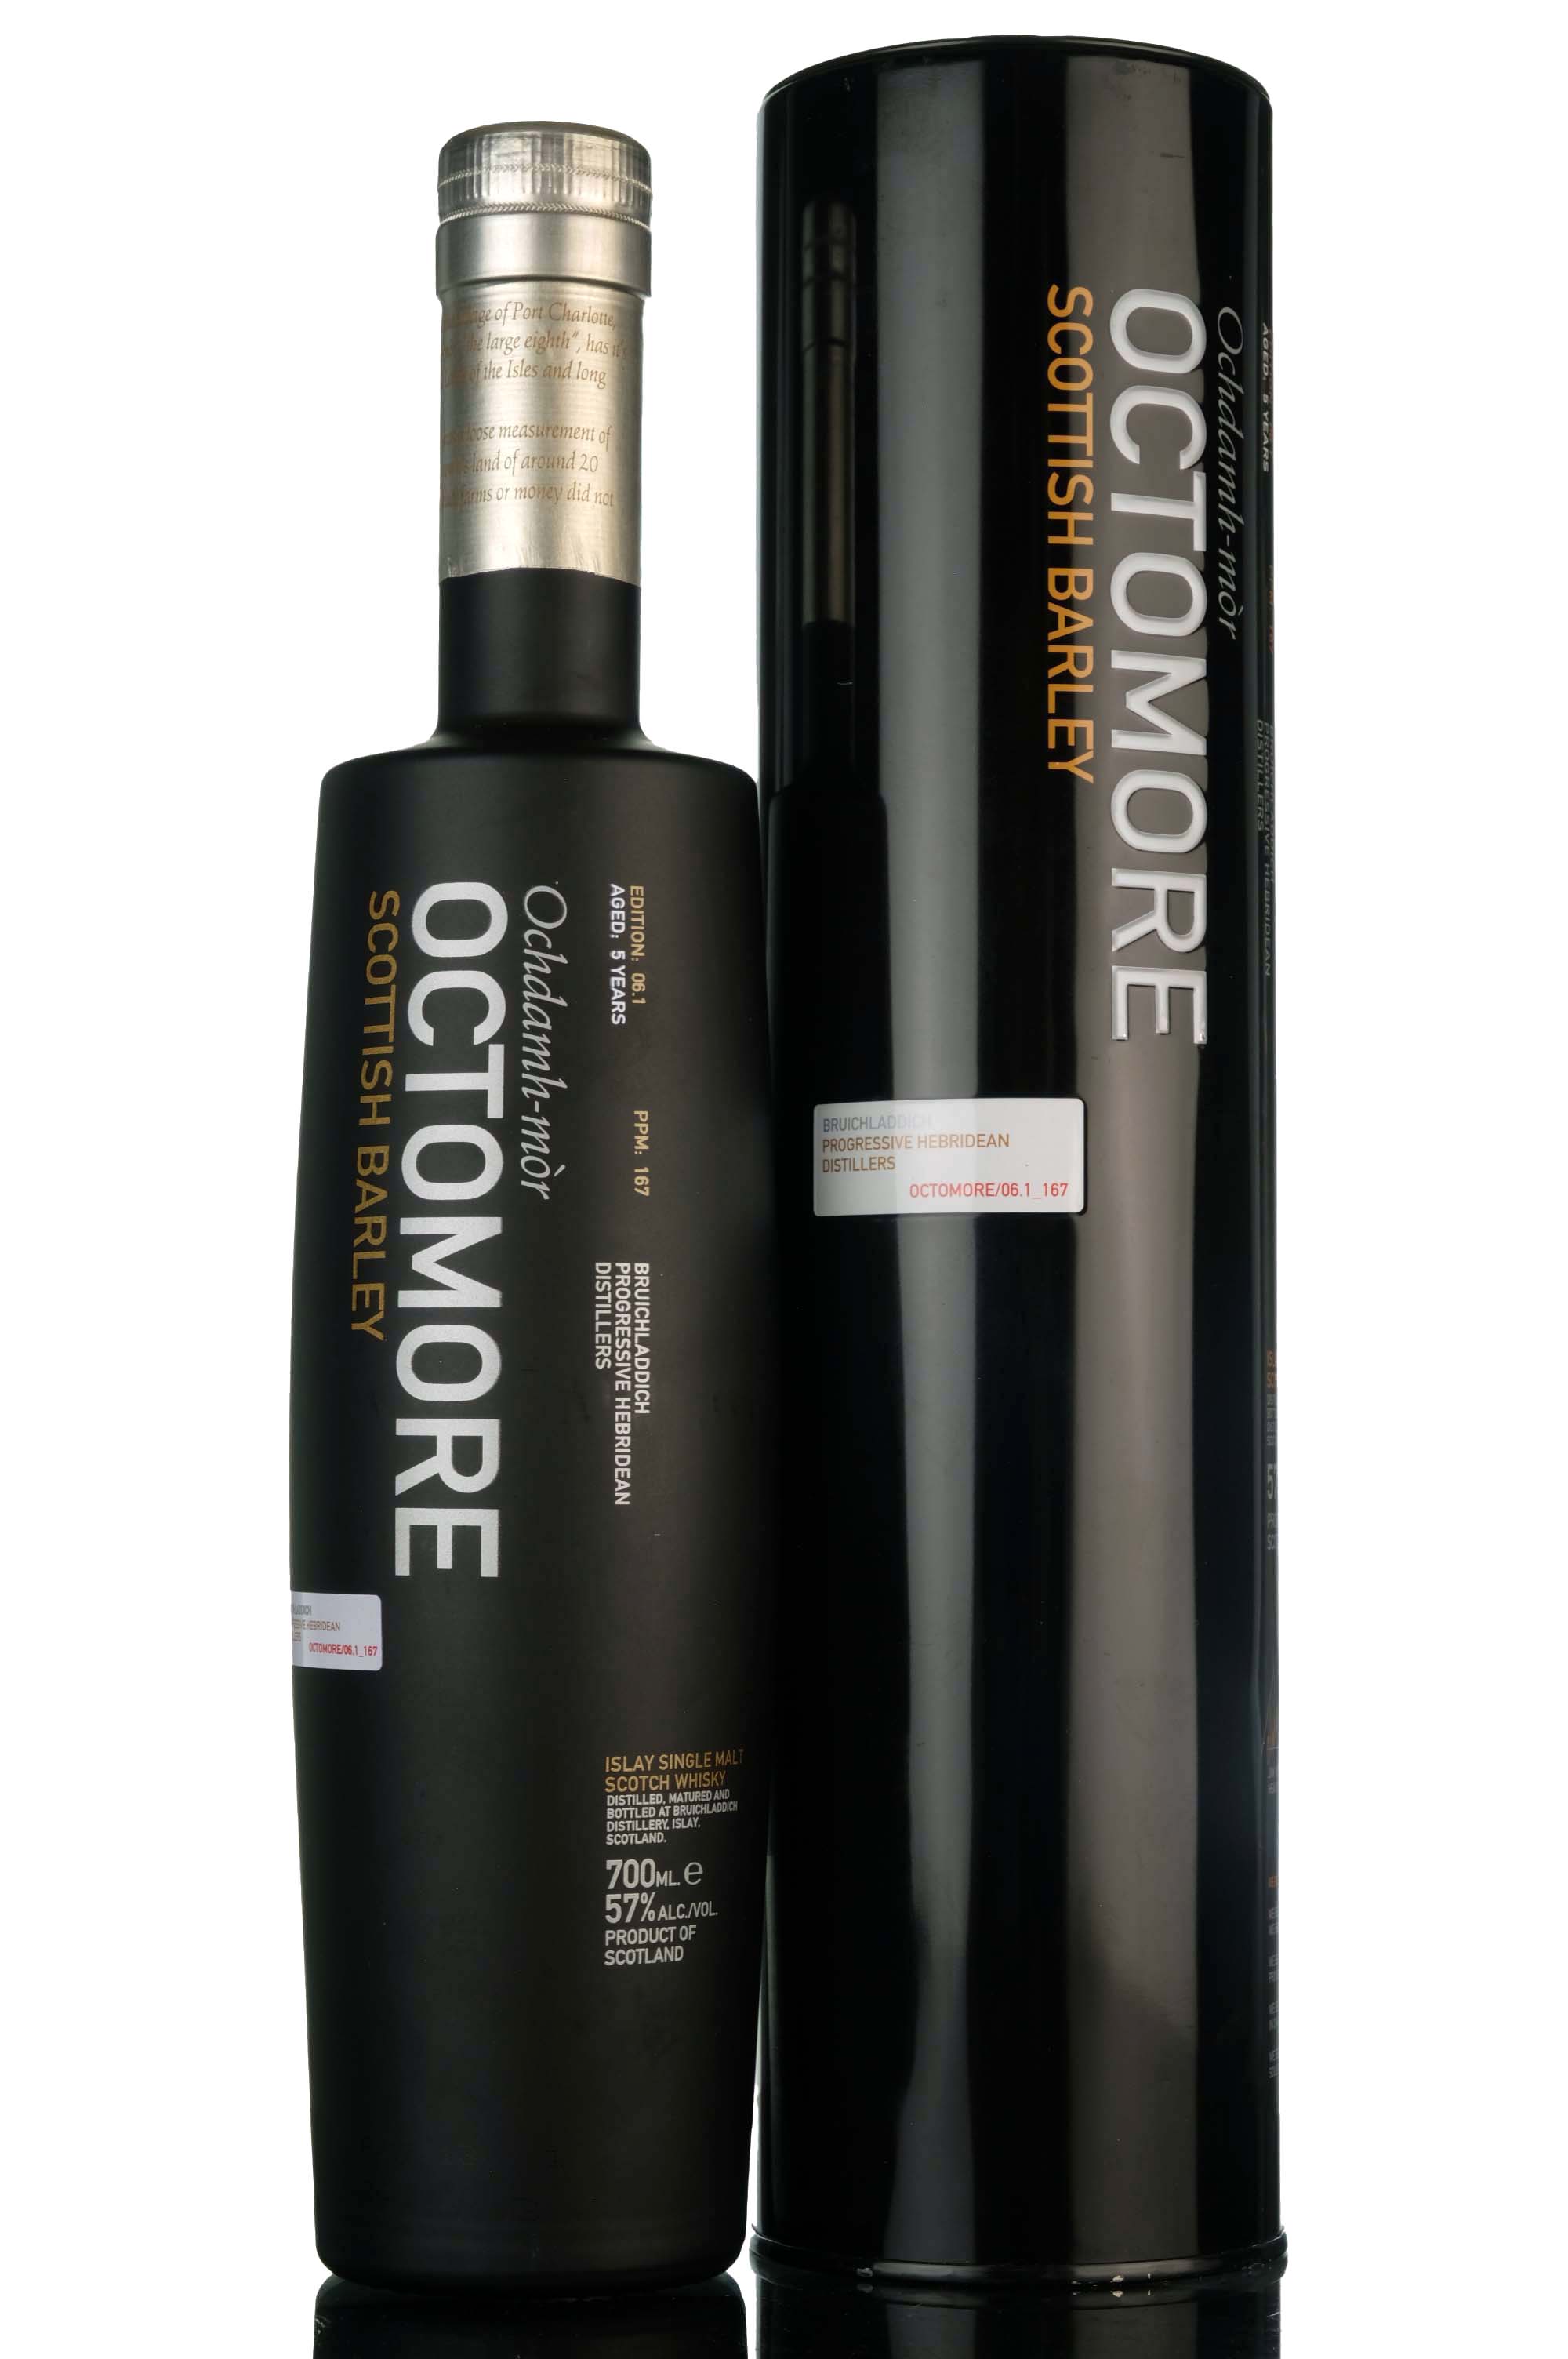 Octomore 6.1 - 2013 Release